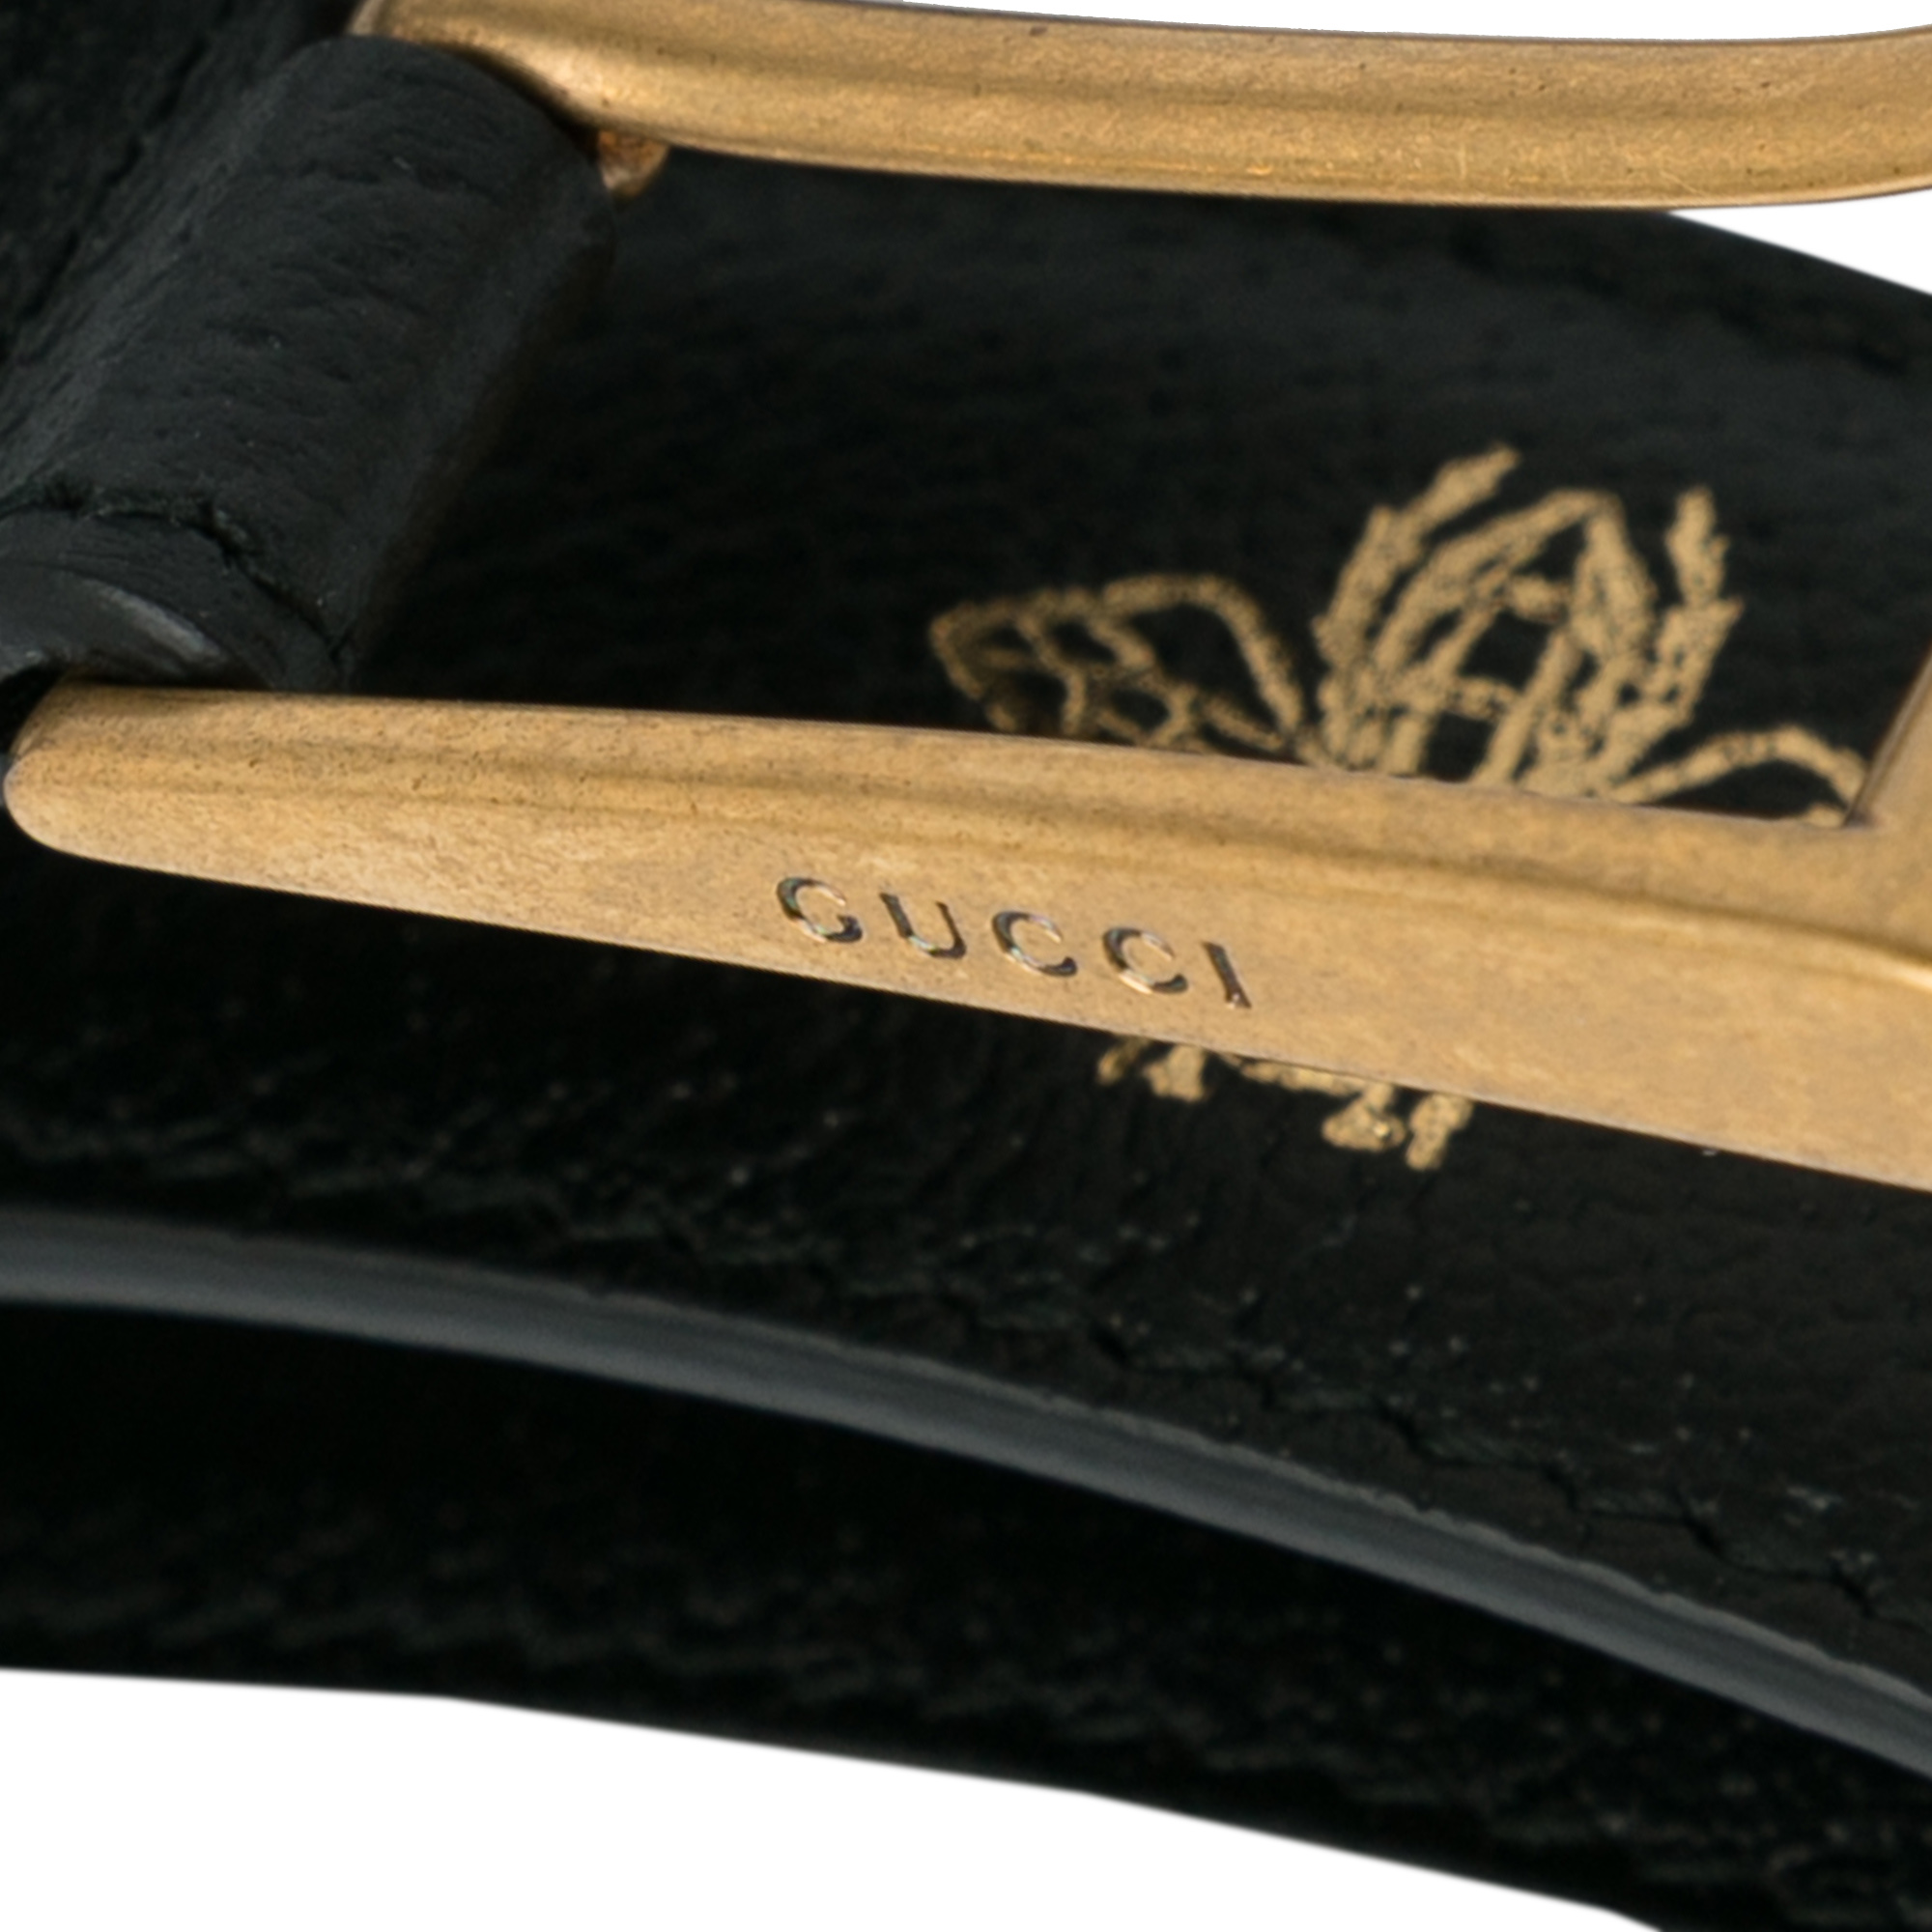 Printed Leather Belt with Gold-tone Buckle